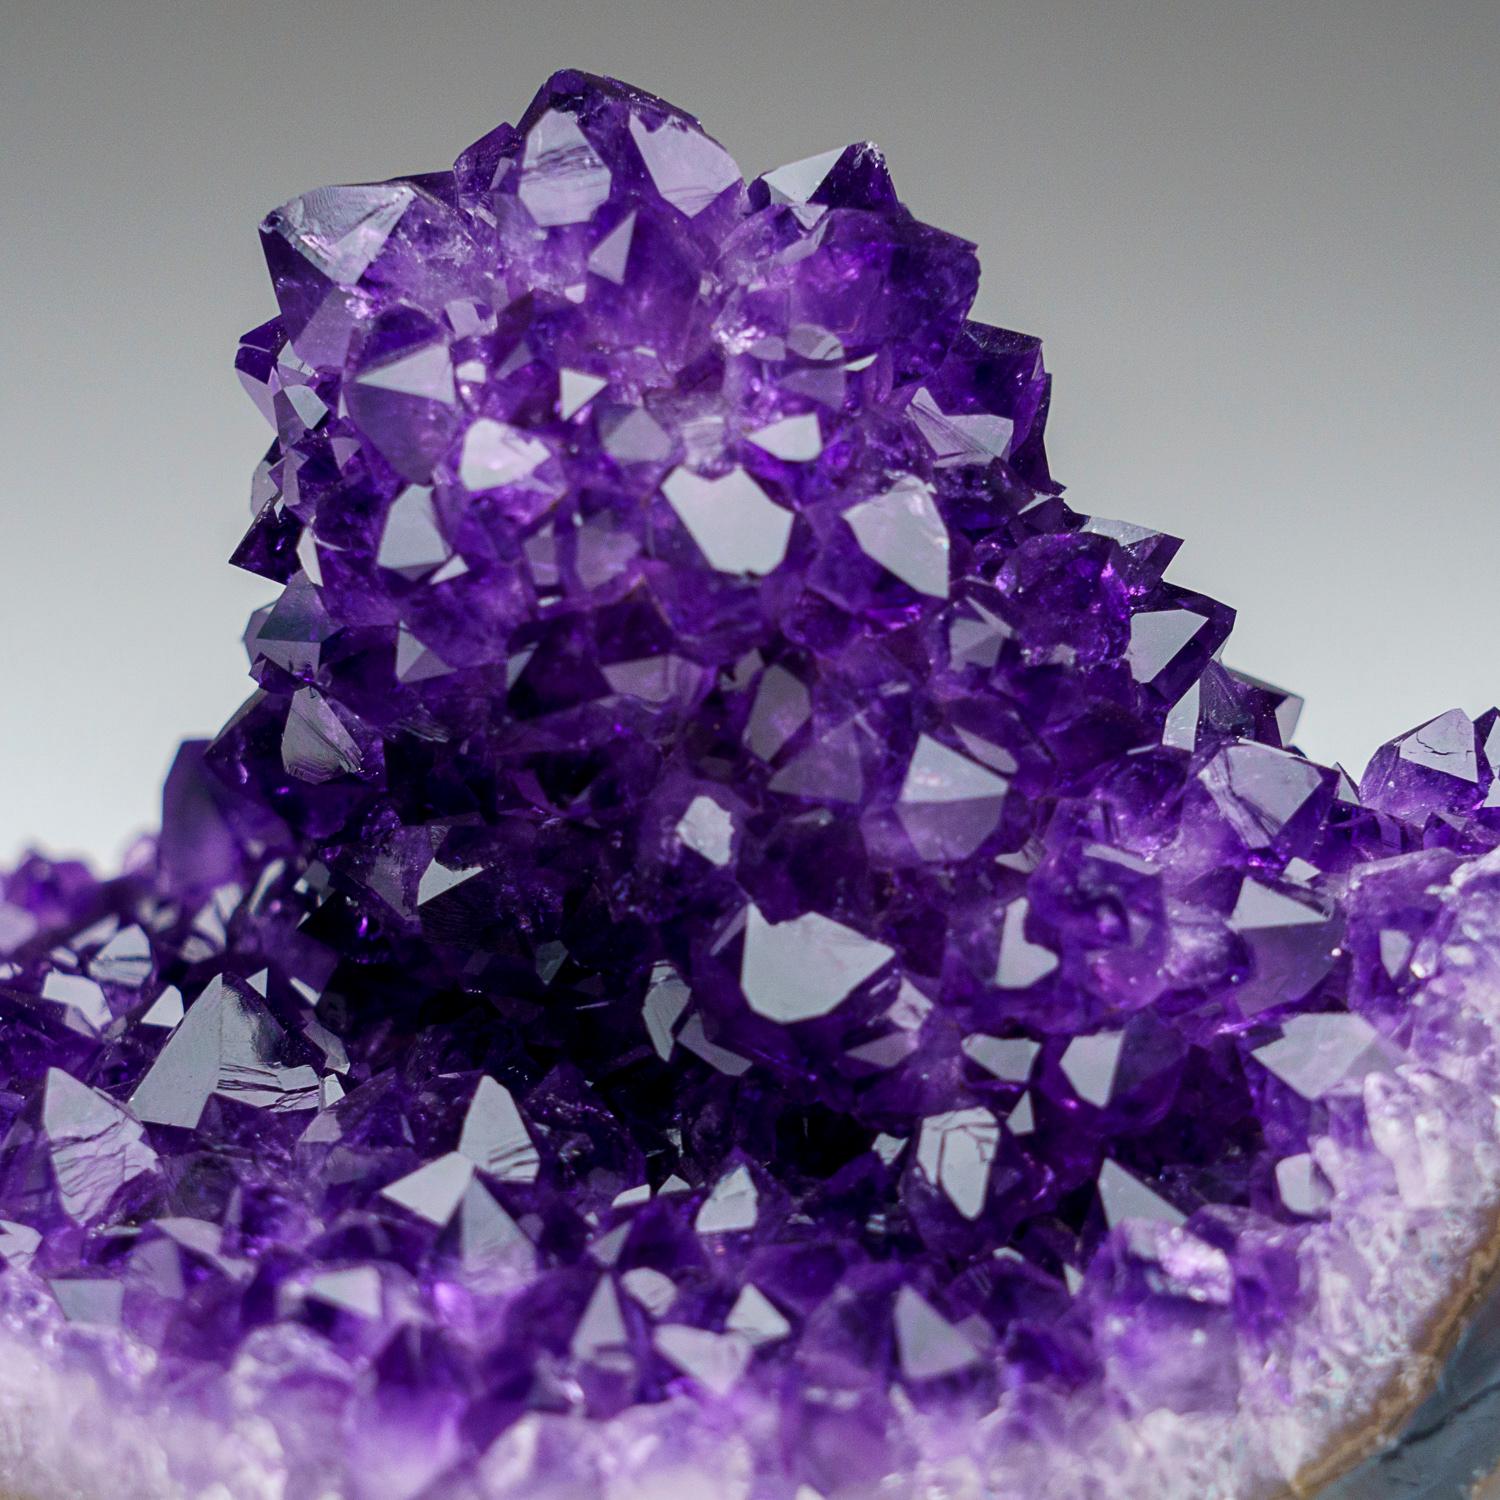 This specimen is a world-class, museum-quality Showy cluster of lustrous purple amethyst quartz crystals from the famous mining district near the Brazilian border, the famous regions of Artigas, Uruguay. The crystals, showcasing a rich purple color,